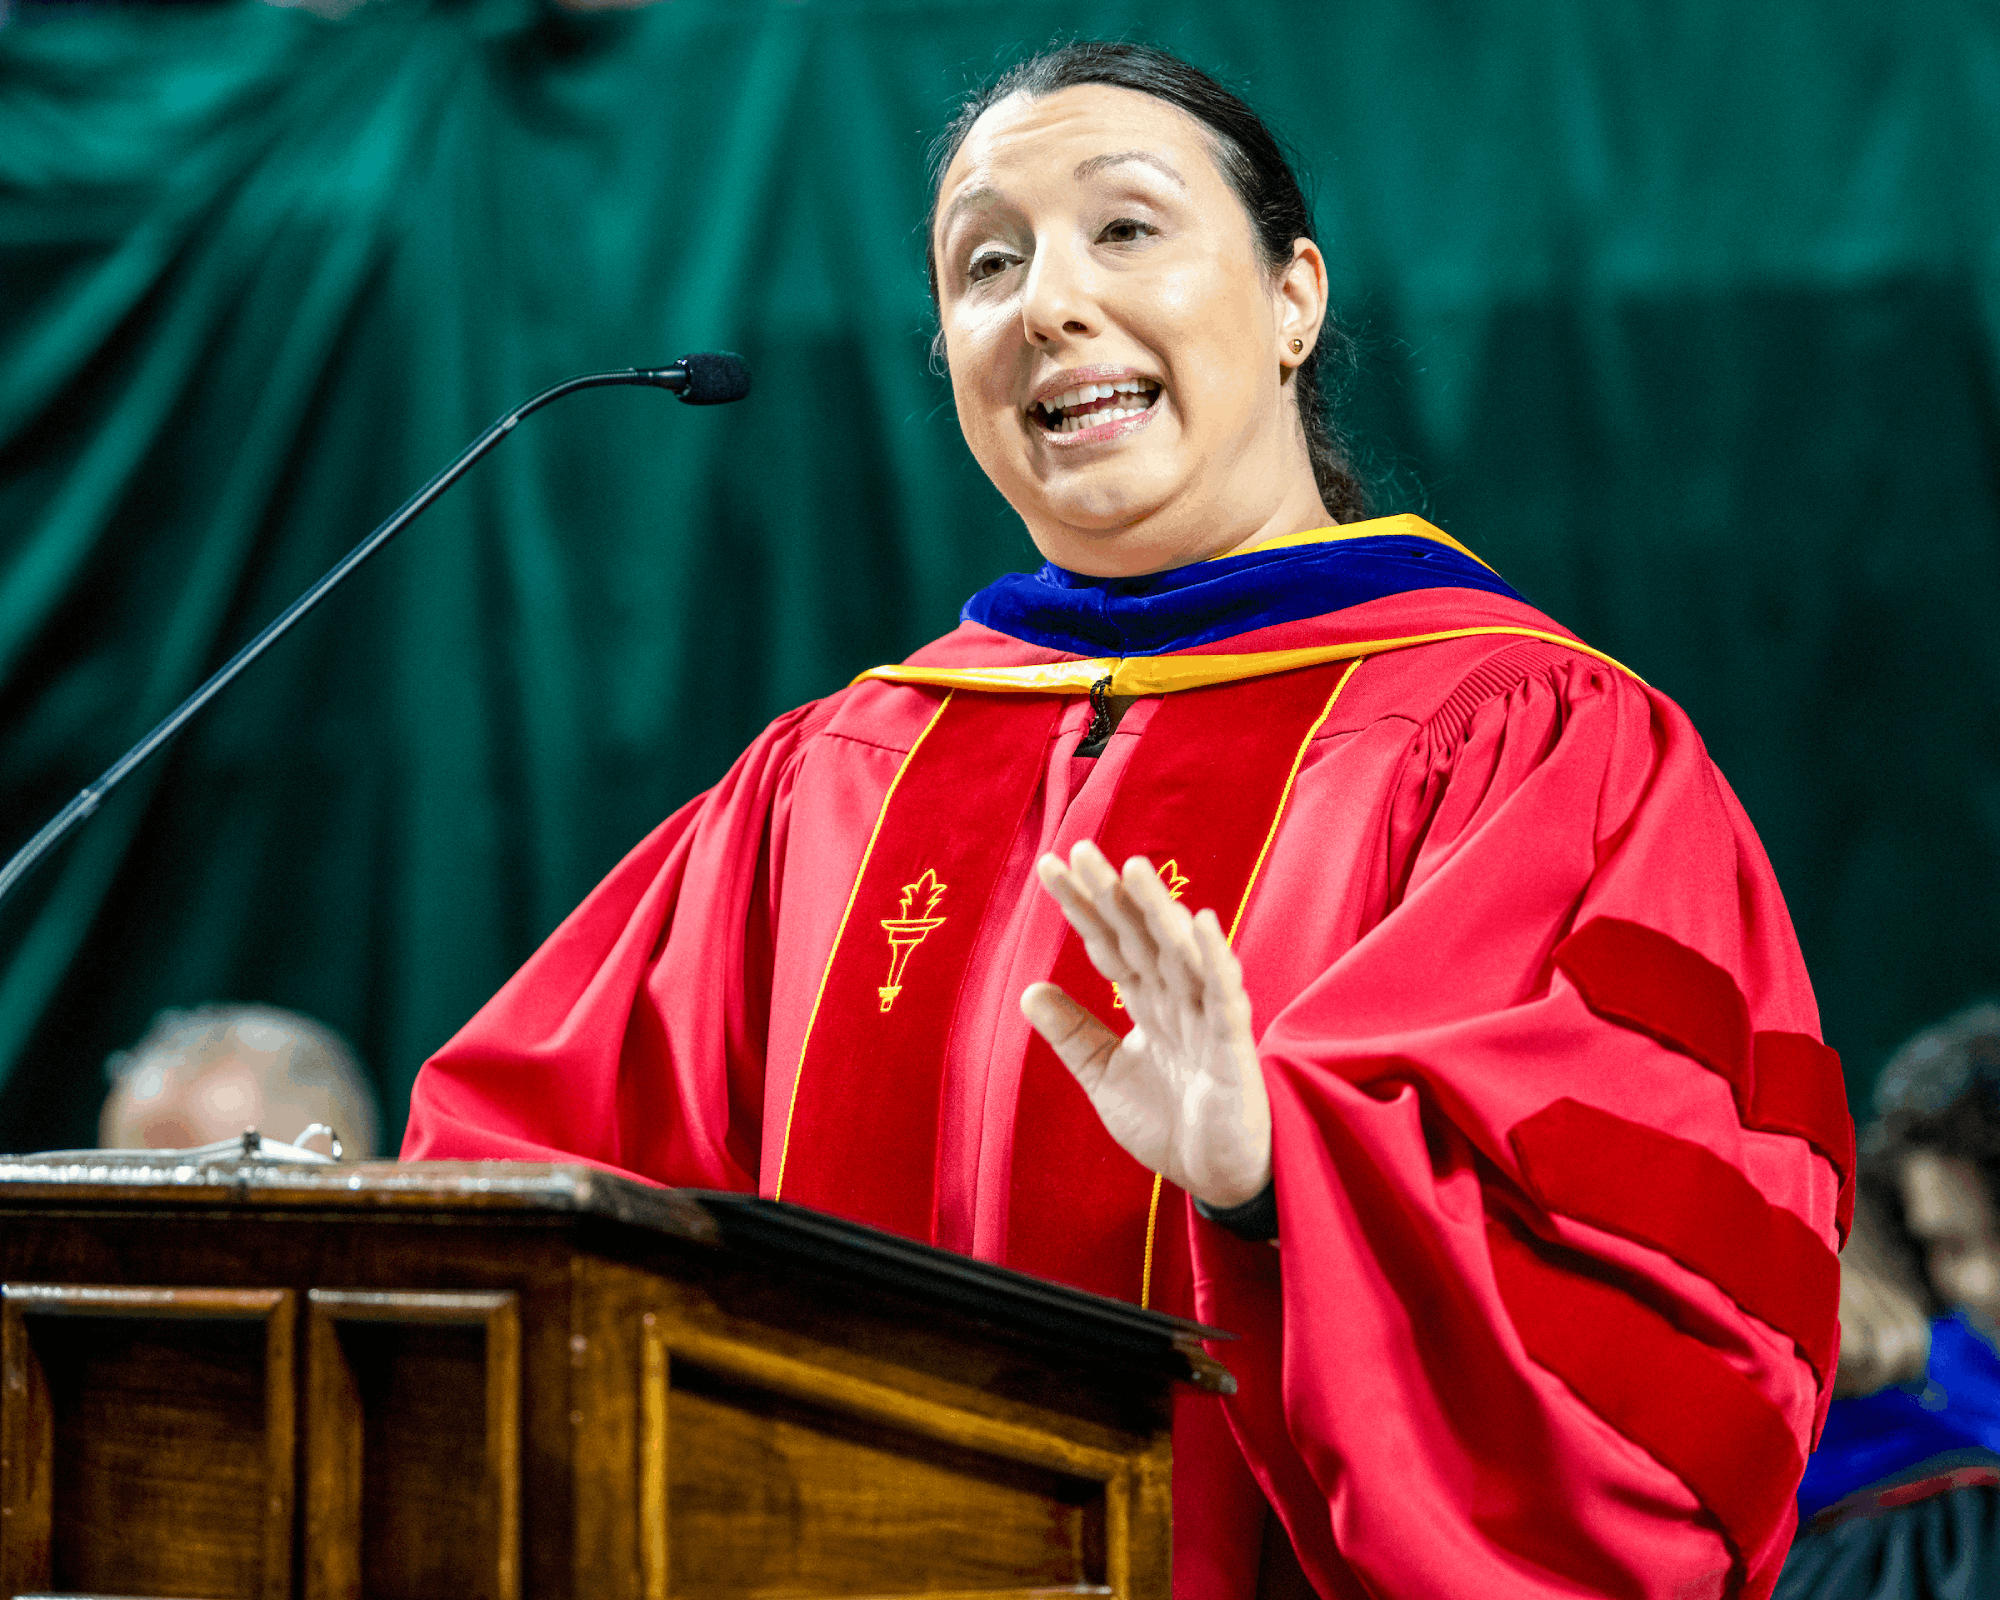 Associate dean and associate professor of political science in the College of Arts and Sciences, Dr. Nuket Sandal delivers OHIO's Fall Commencement Address on Saturday, December 10.